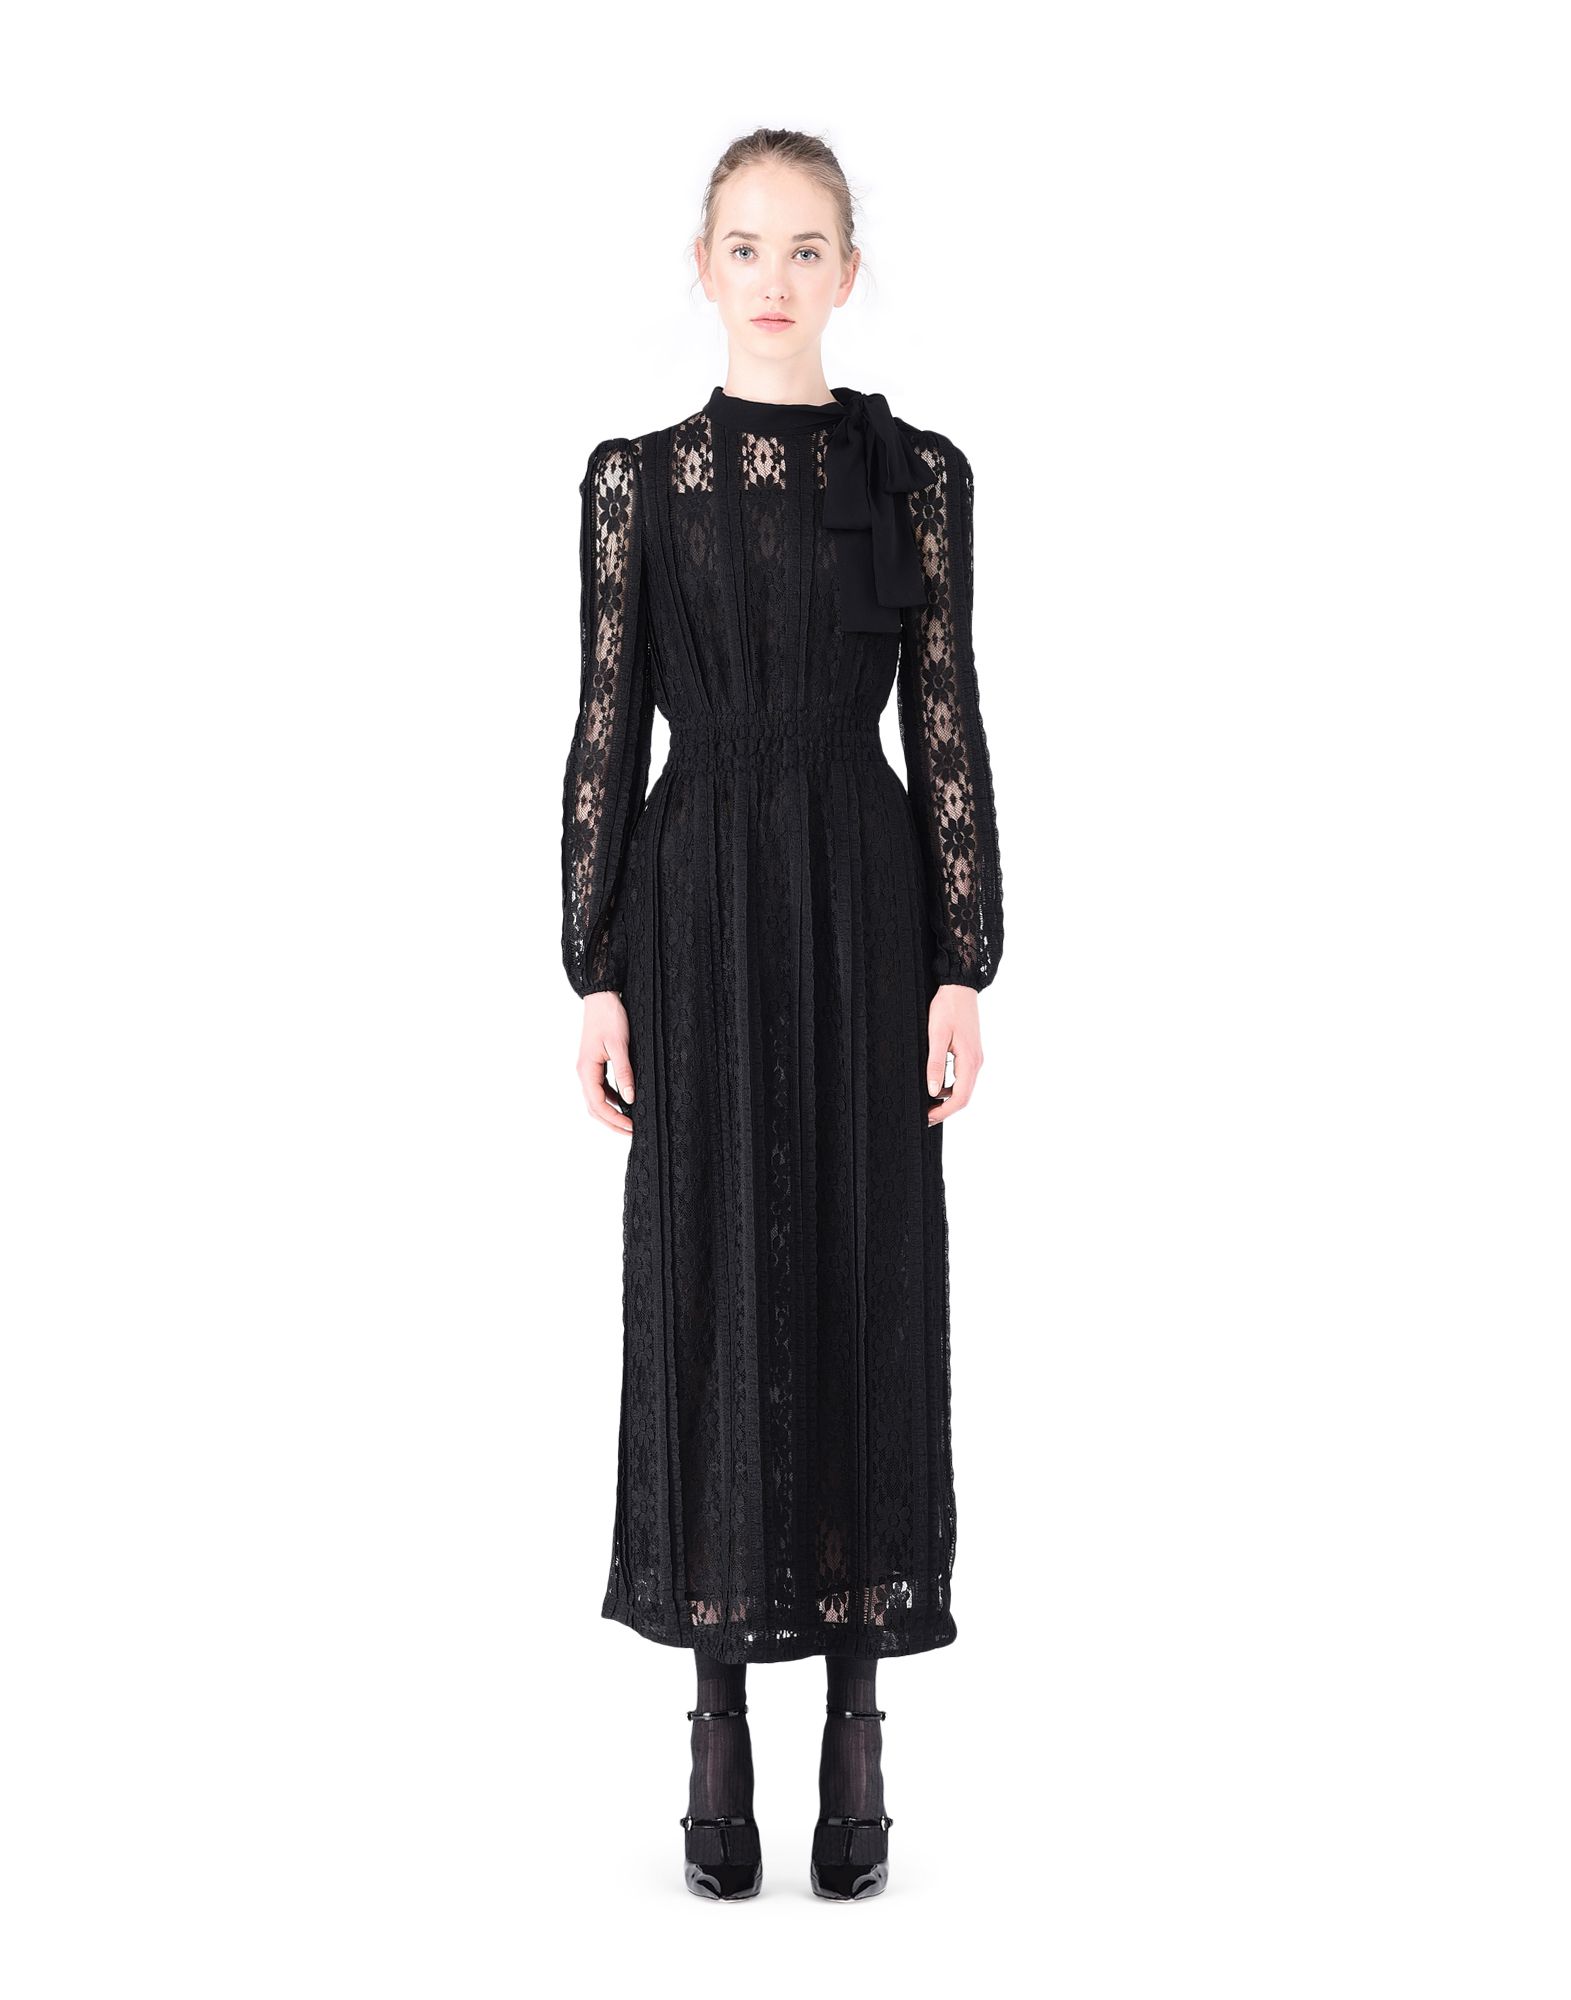 REDValentino Floral Jersey Lace Dress - Dress for Women | REDValentino ...